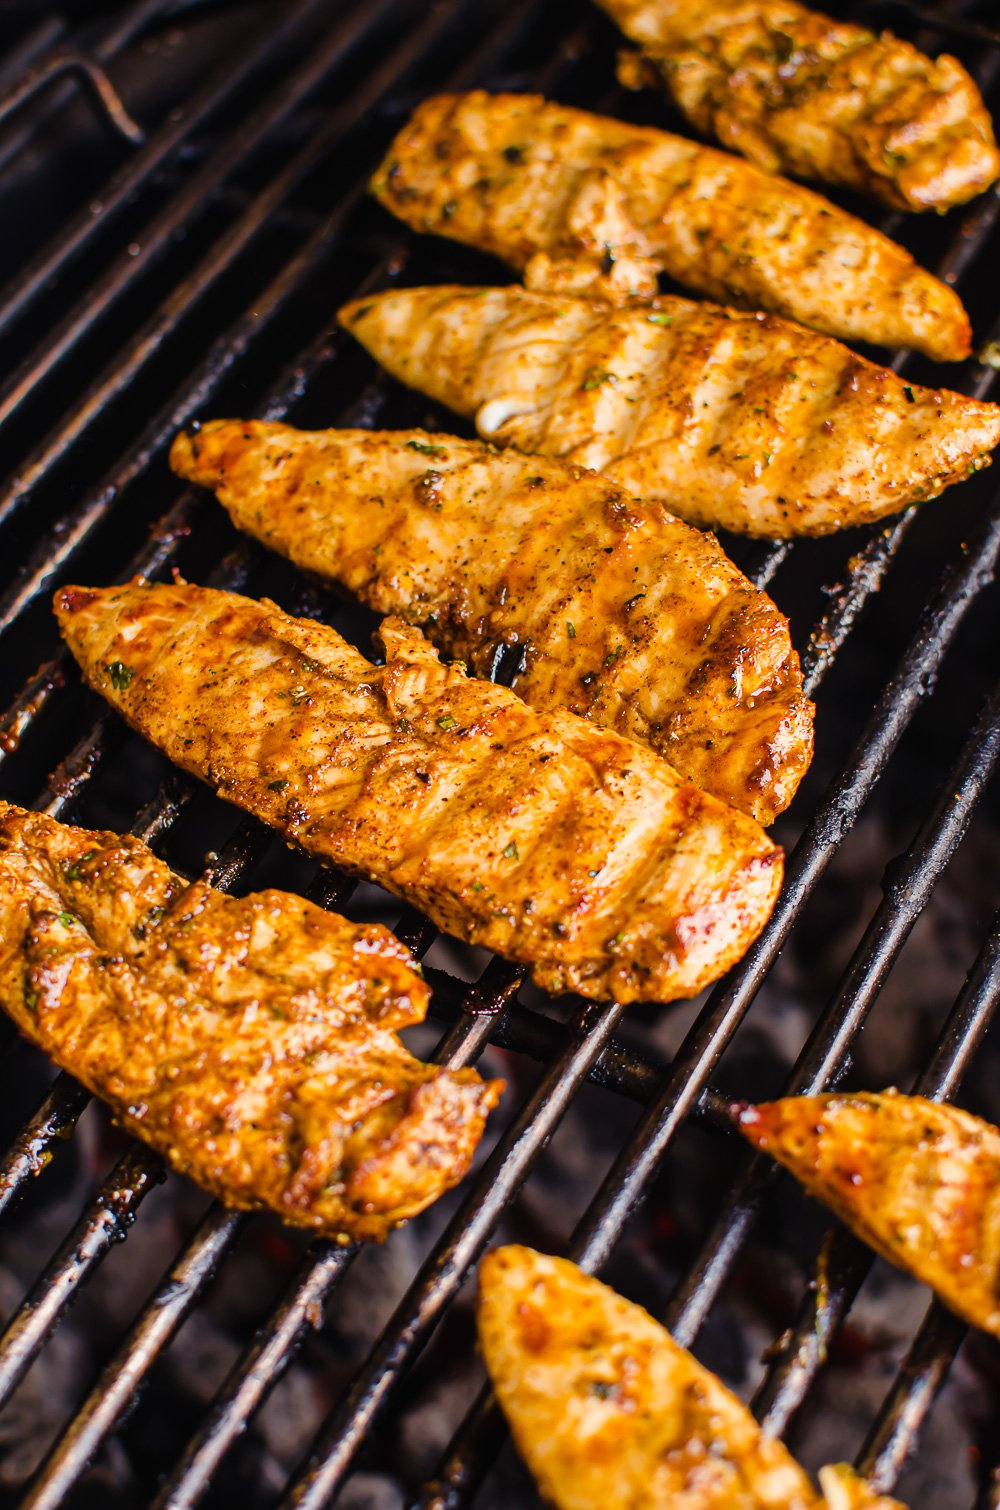 Southwest chicken tenders on a grill.